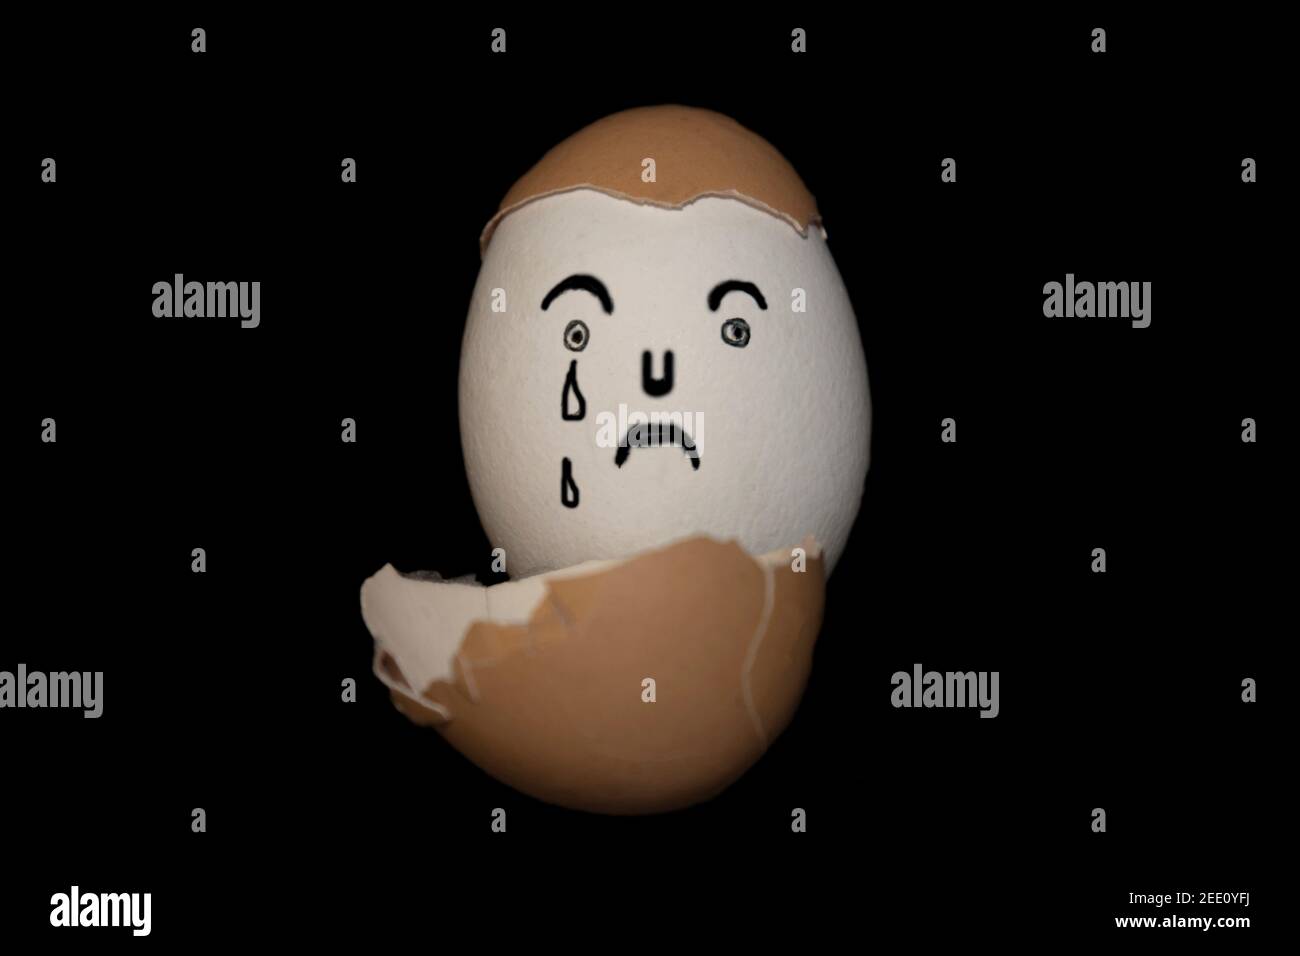 Painted sad face on an egg Stock Photo